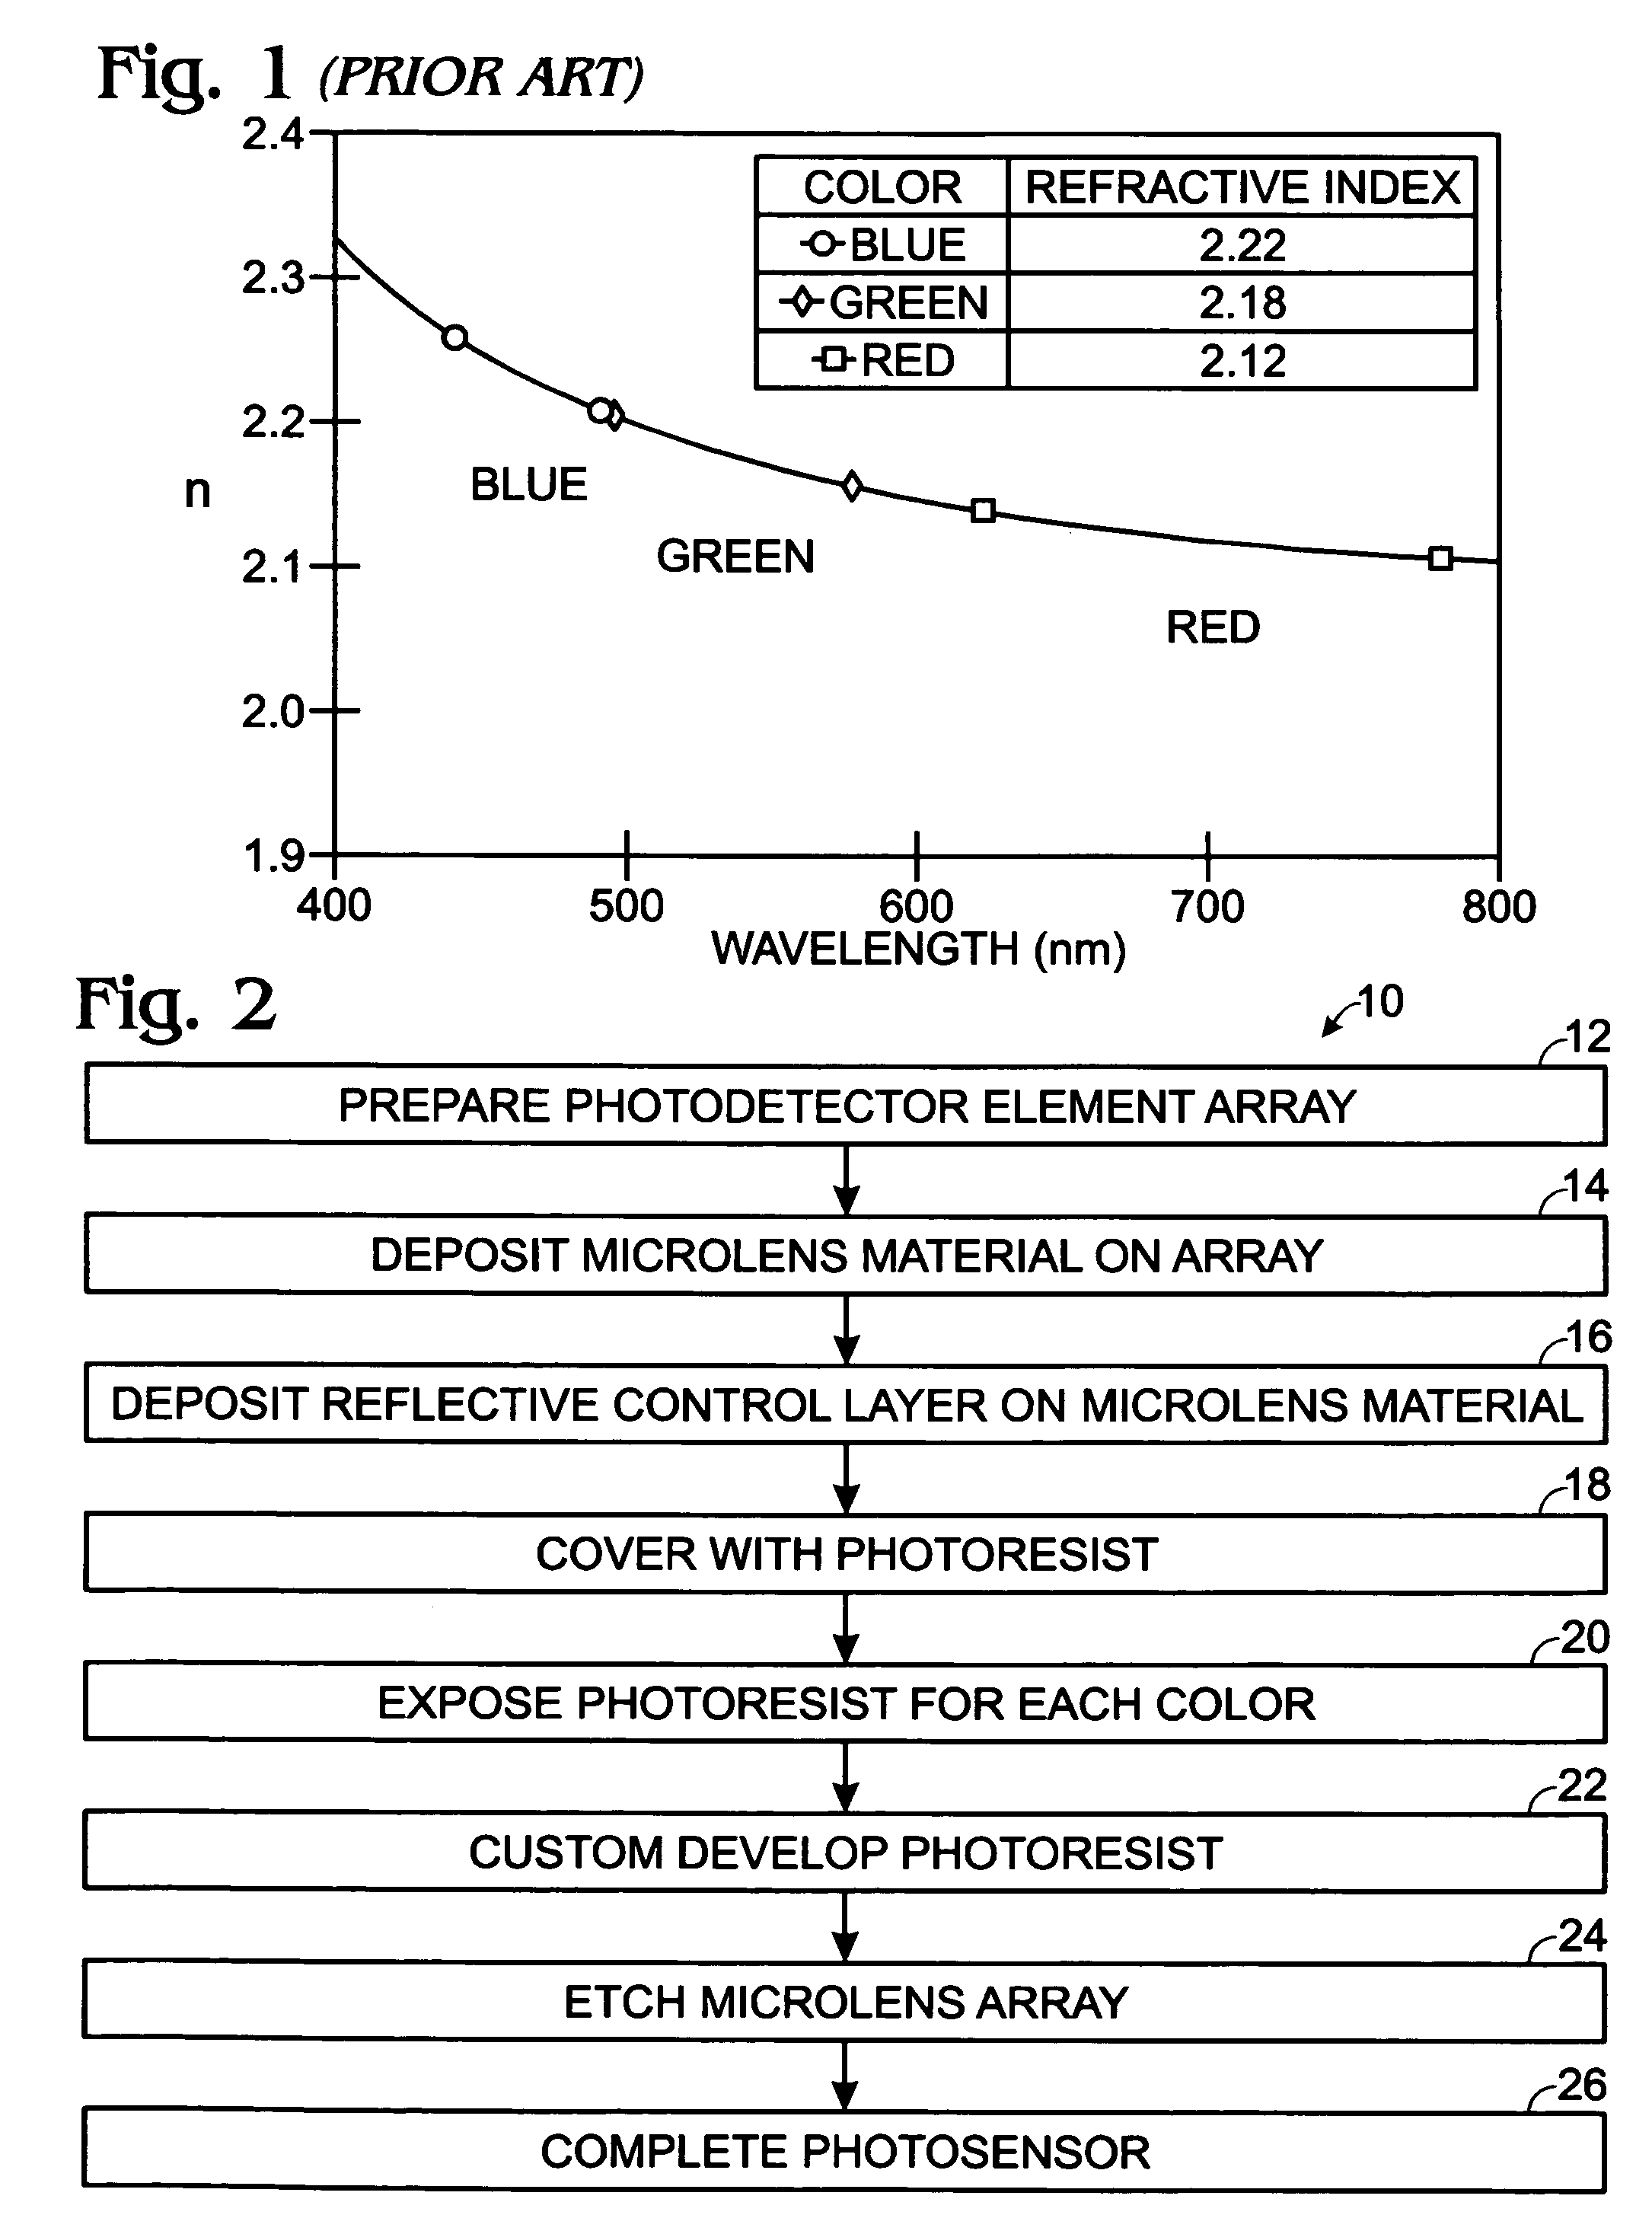 Step-over lithography to produce parabolic photoresist profiles for microlens formation